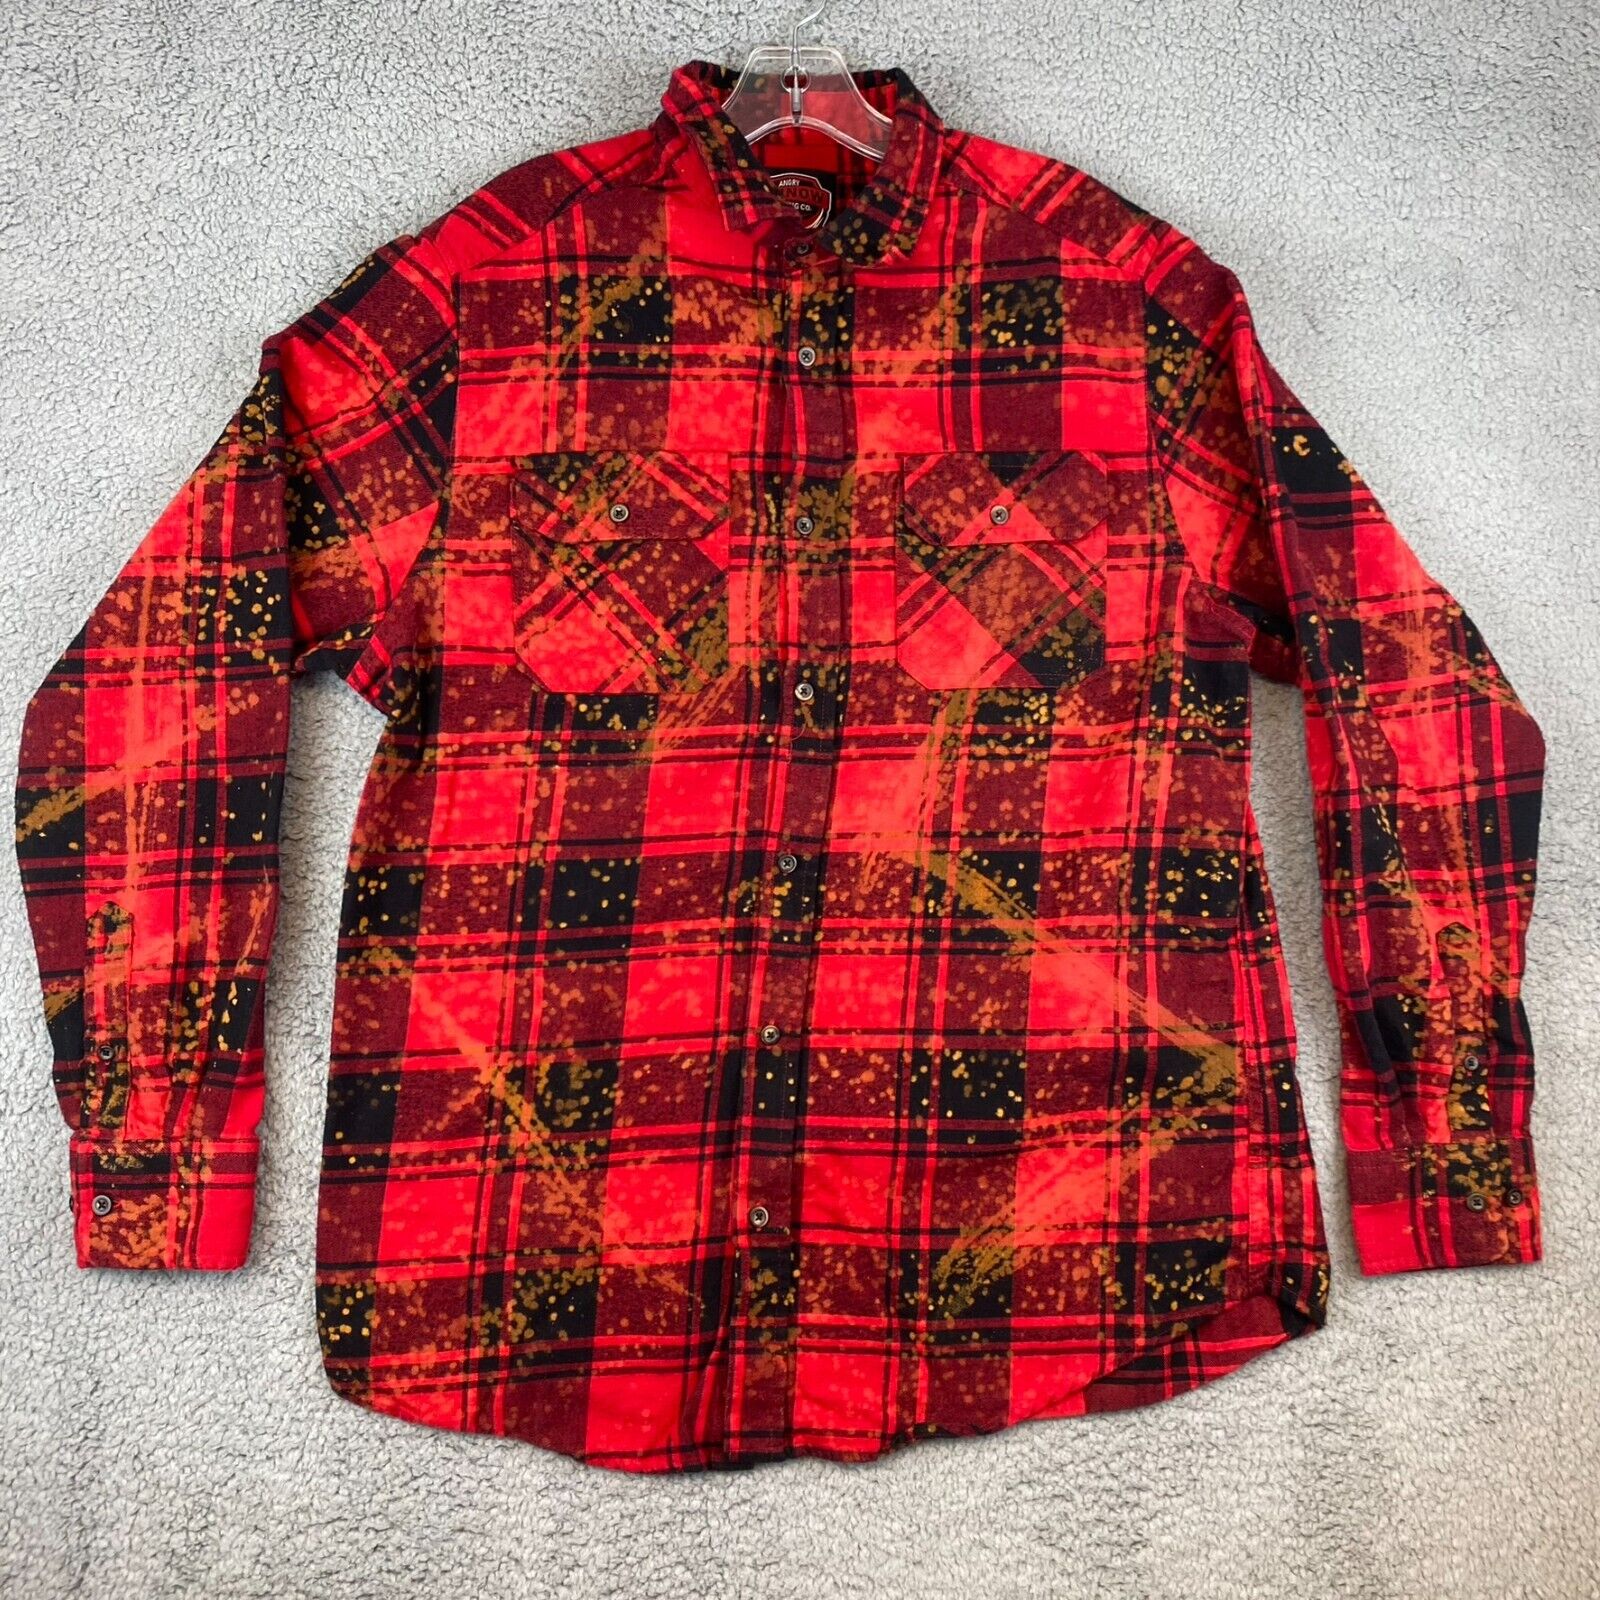 Angry Minnow Shirt Mens L Red Plaid Flannel Speckled Minnesota Paul Bunyan Fish